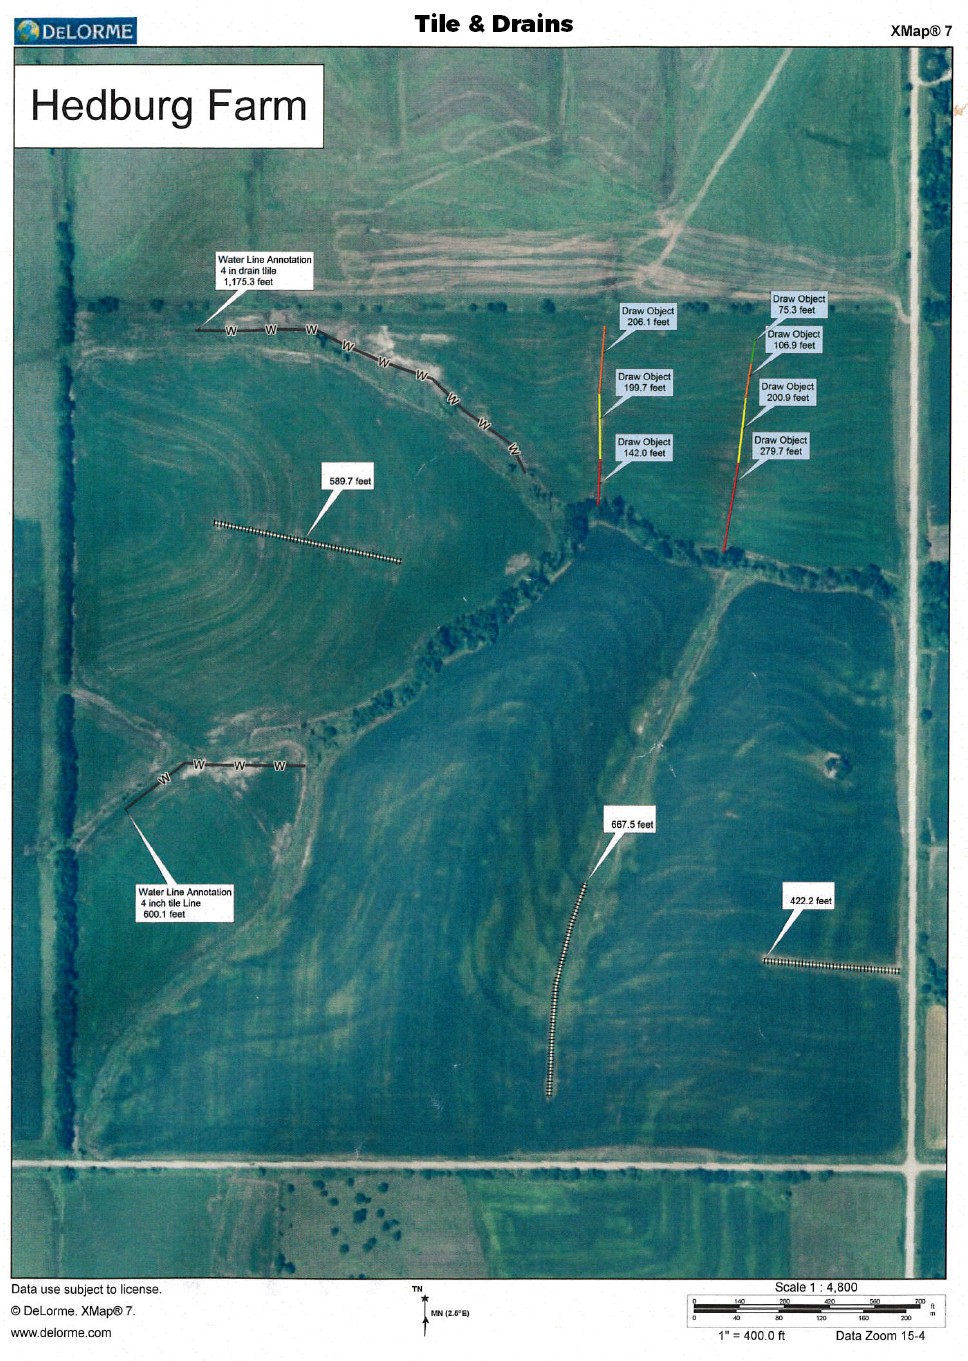 Picture: Overhead view of the farm with project notes.